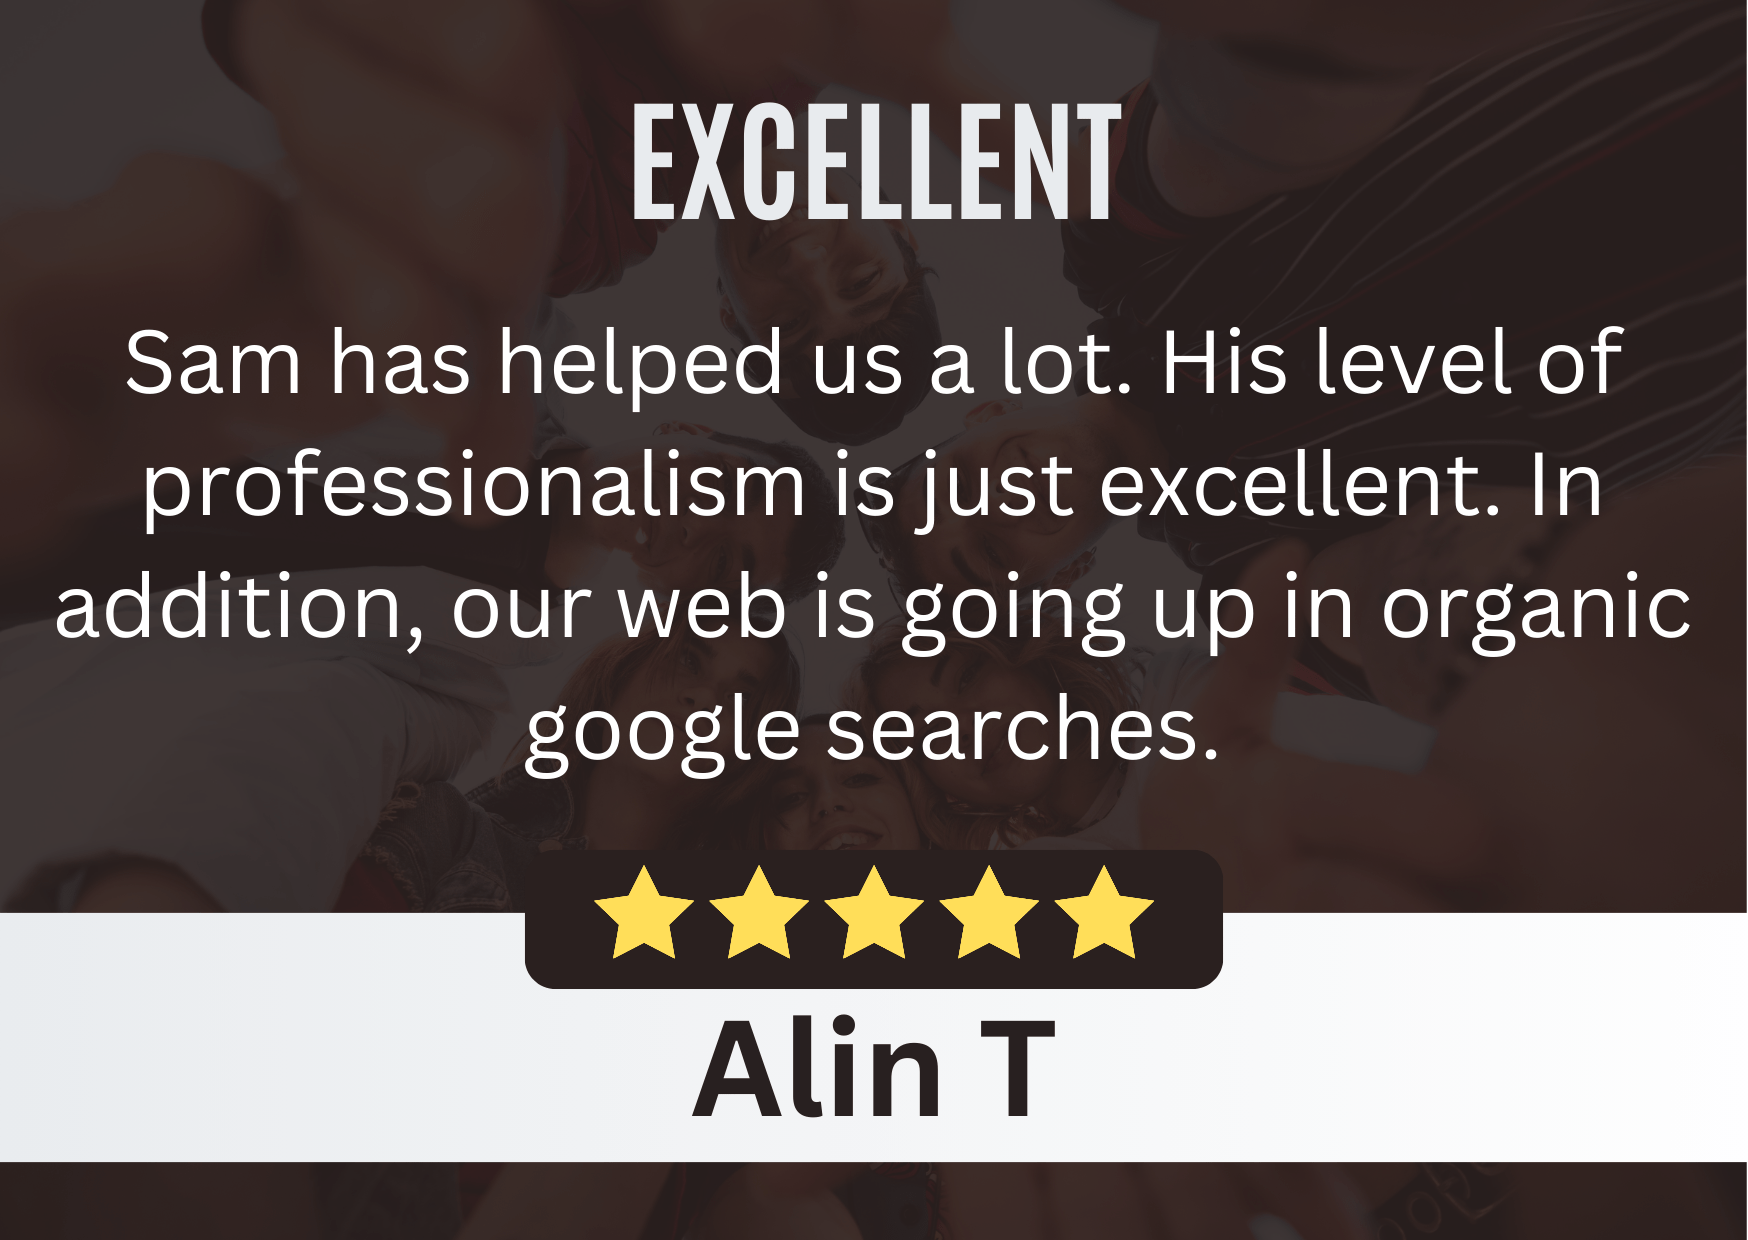 Alin T - Edworthy Media Review | PPC Agency SEO Services Exeter. Review Content: Sam has helped us a lot. His level of professionalism is just excellent. In addition, our website is going up in organic Google searches.